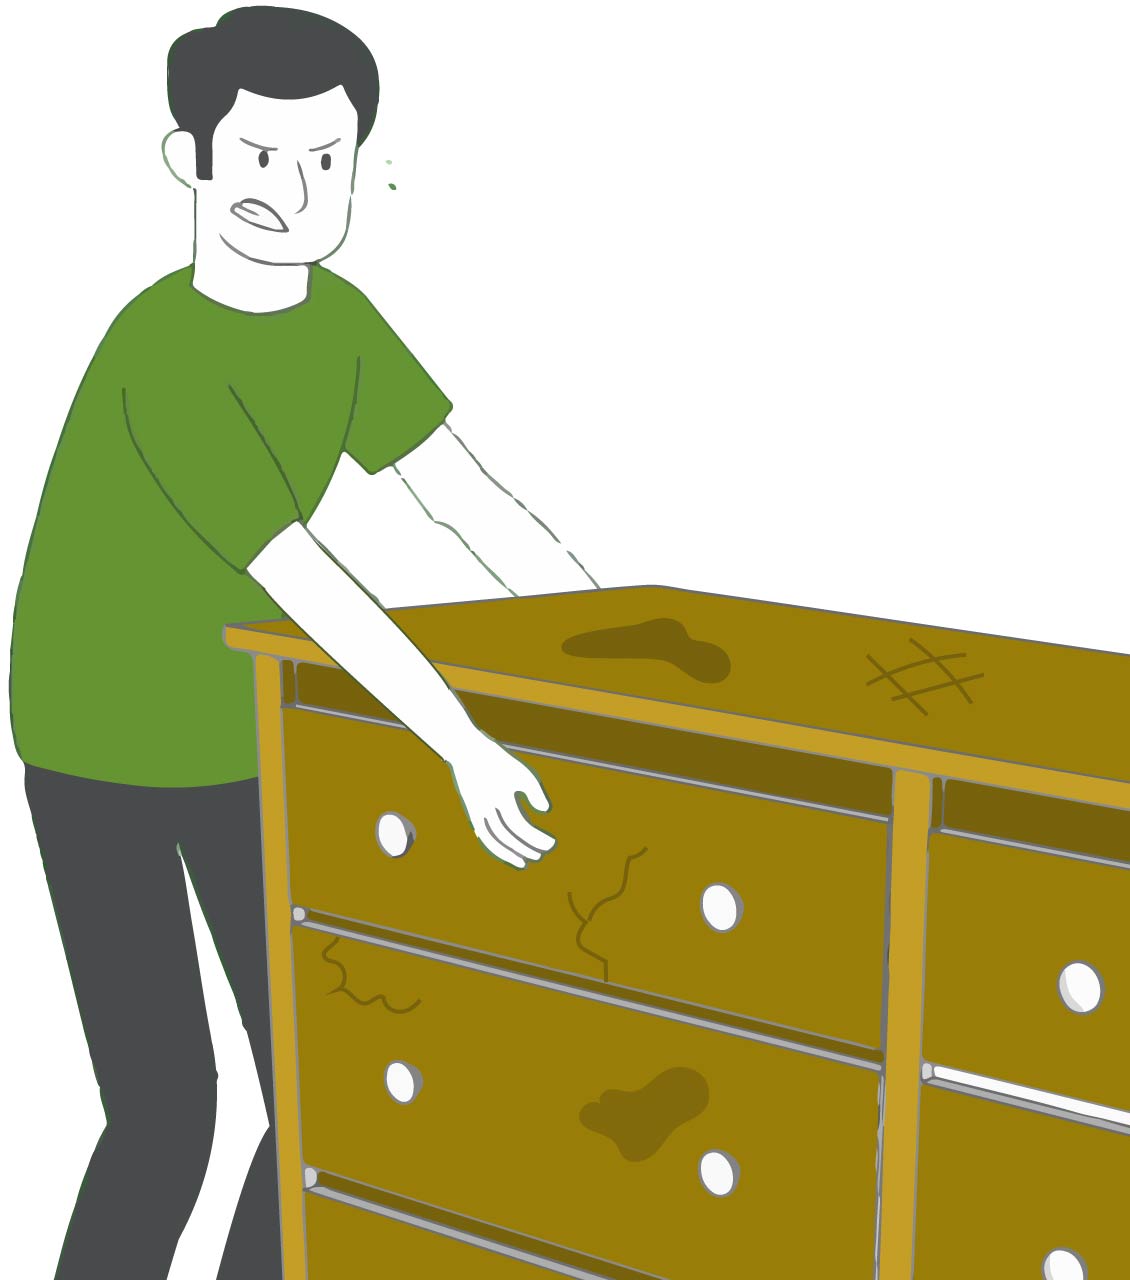 Easy IL Furniture Removal & Disposal Services